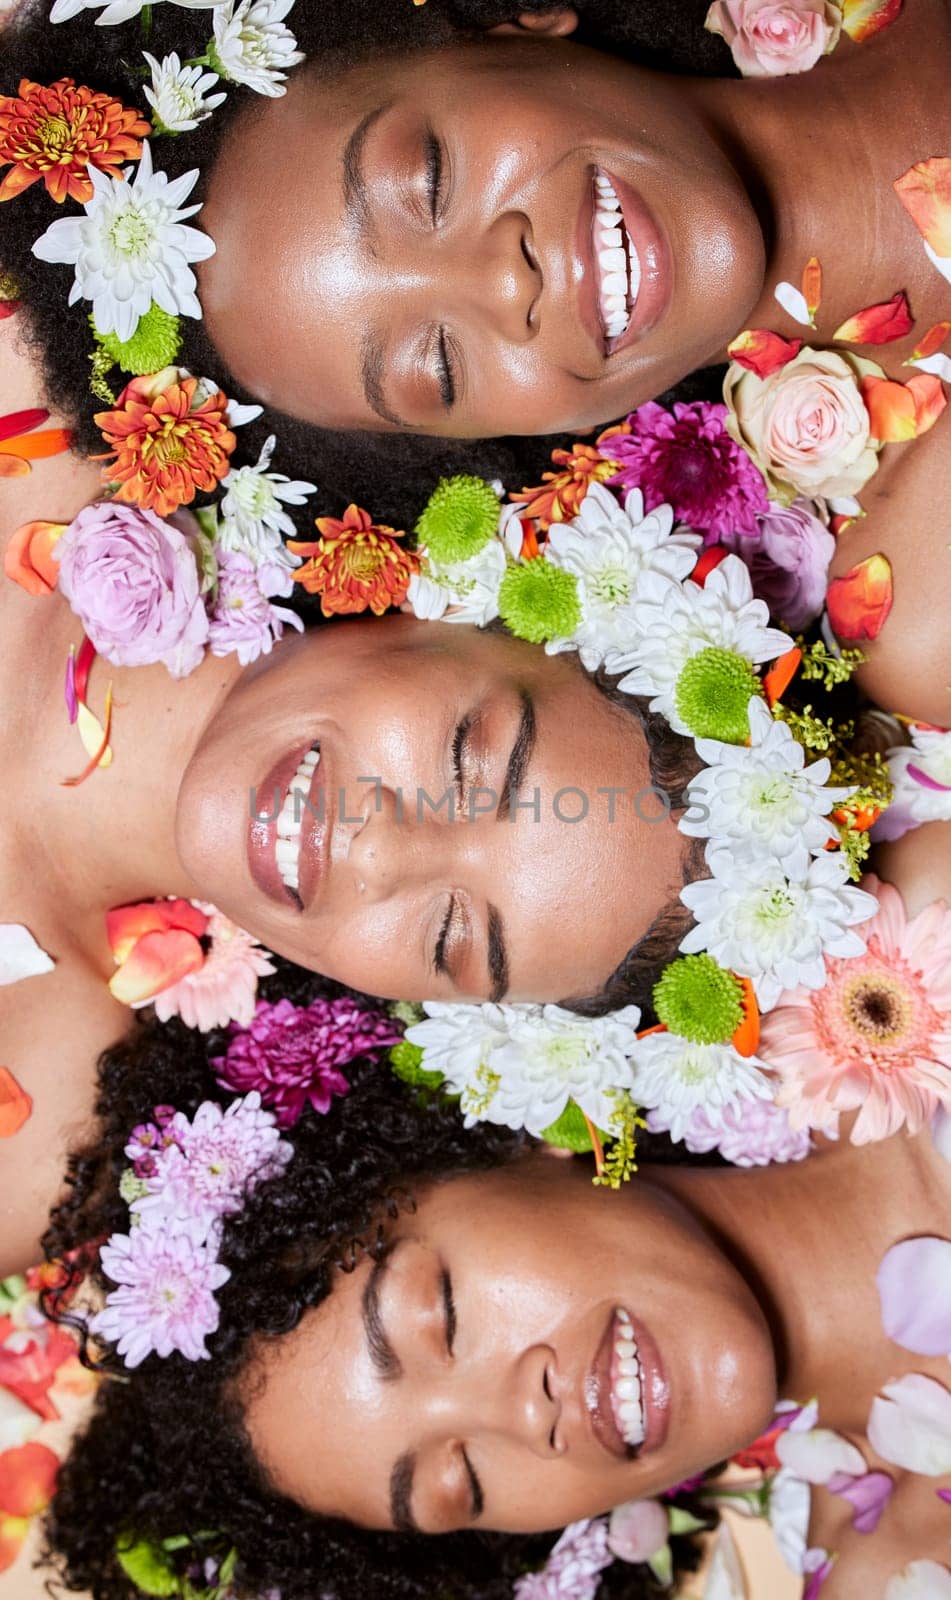 Black women, flowers and skincare wellness of diversity, cosmetic and facial health with plants. Black woman top view with cosmetics, body care and healthy flower with a smile about dermatology.